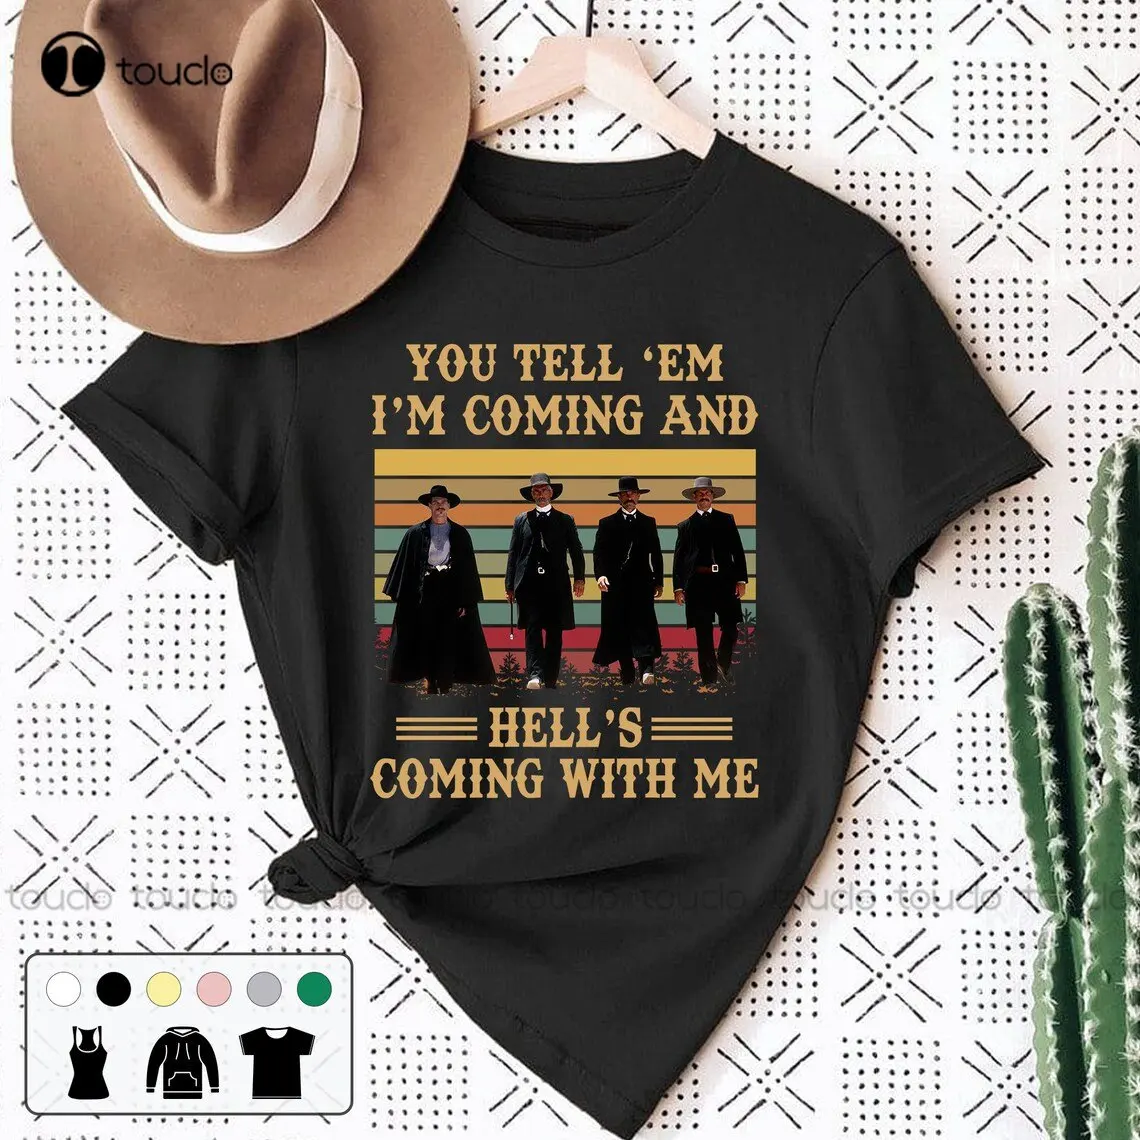 

You Tell Them I'M Coming And Hell'S Coming With Me Vintage T-Shirt Tombstone Funny Movie Shirt Doc Holliday Tombstone Unisex Tee